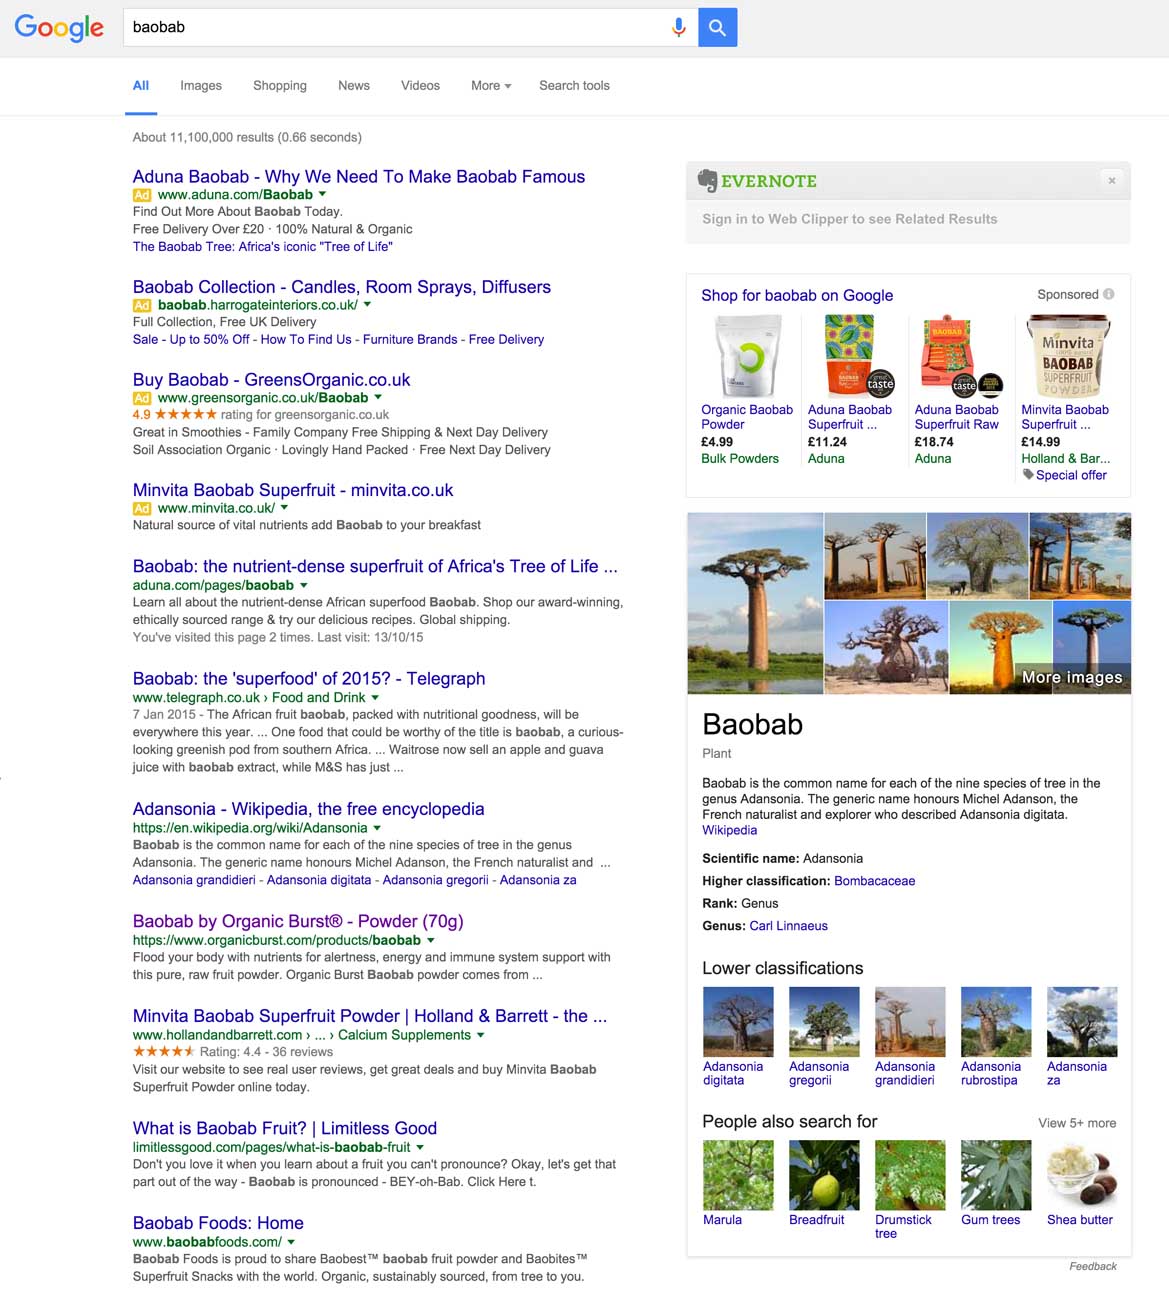 Baobab search results